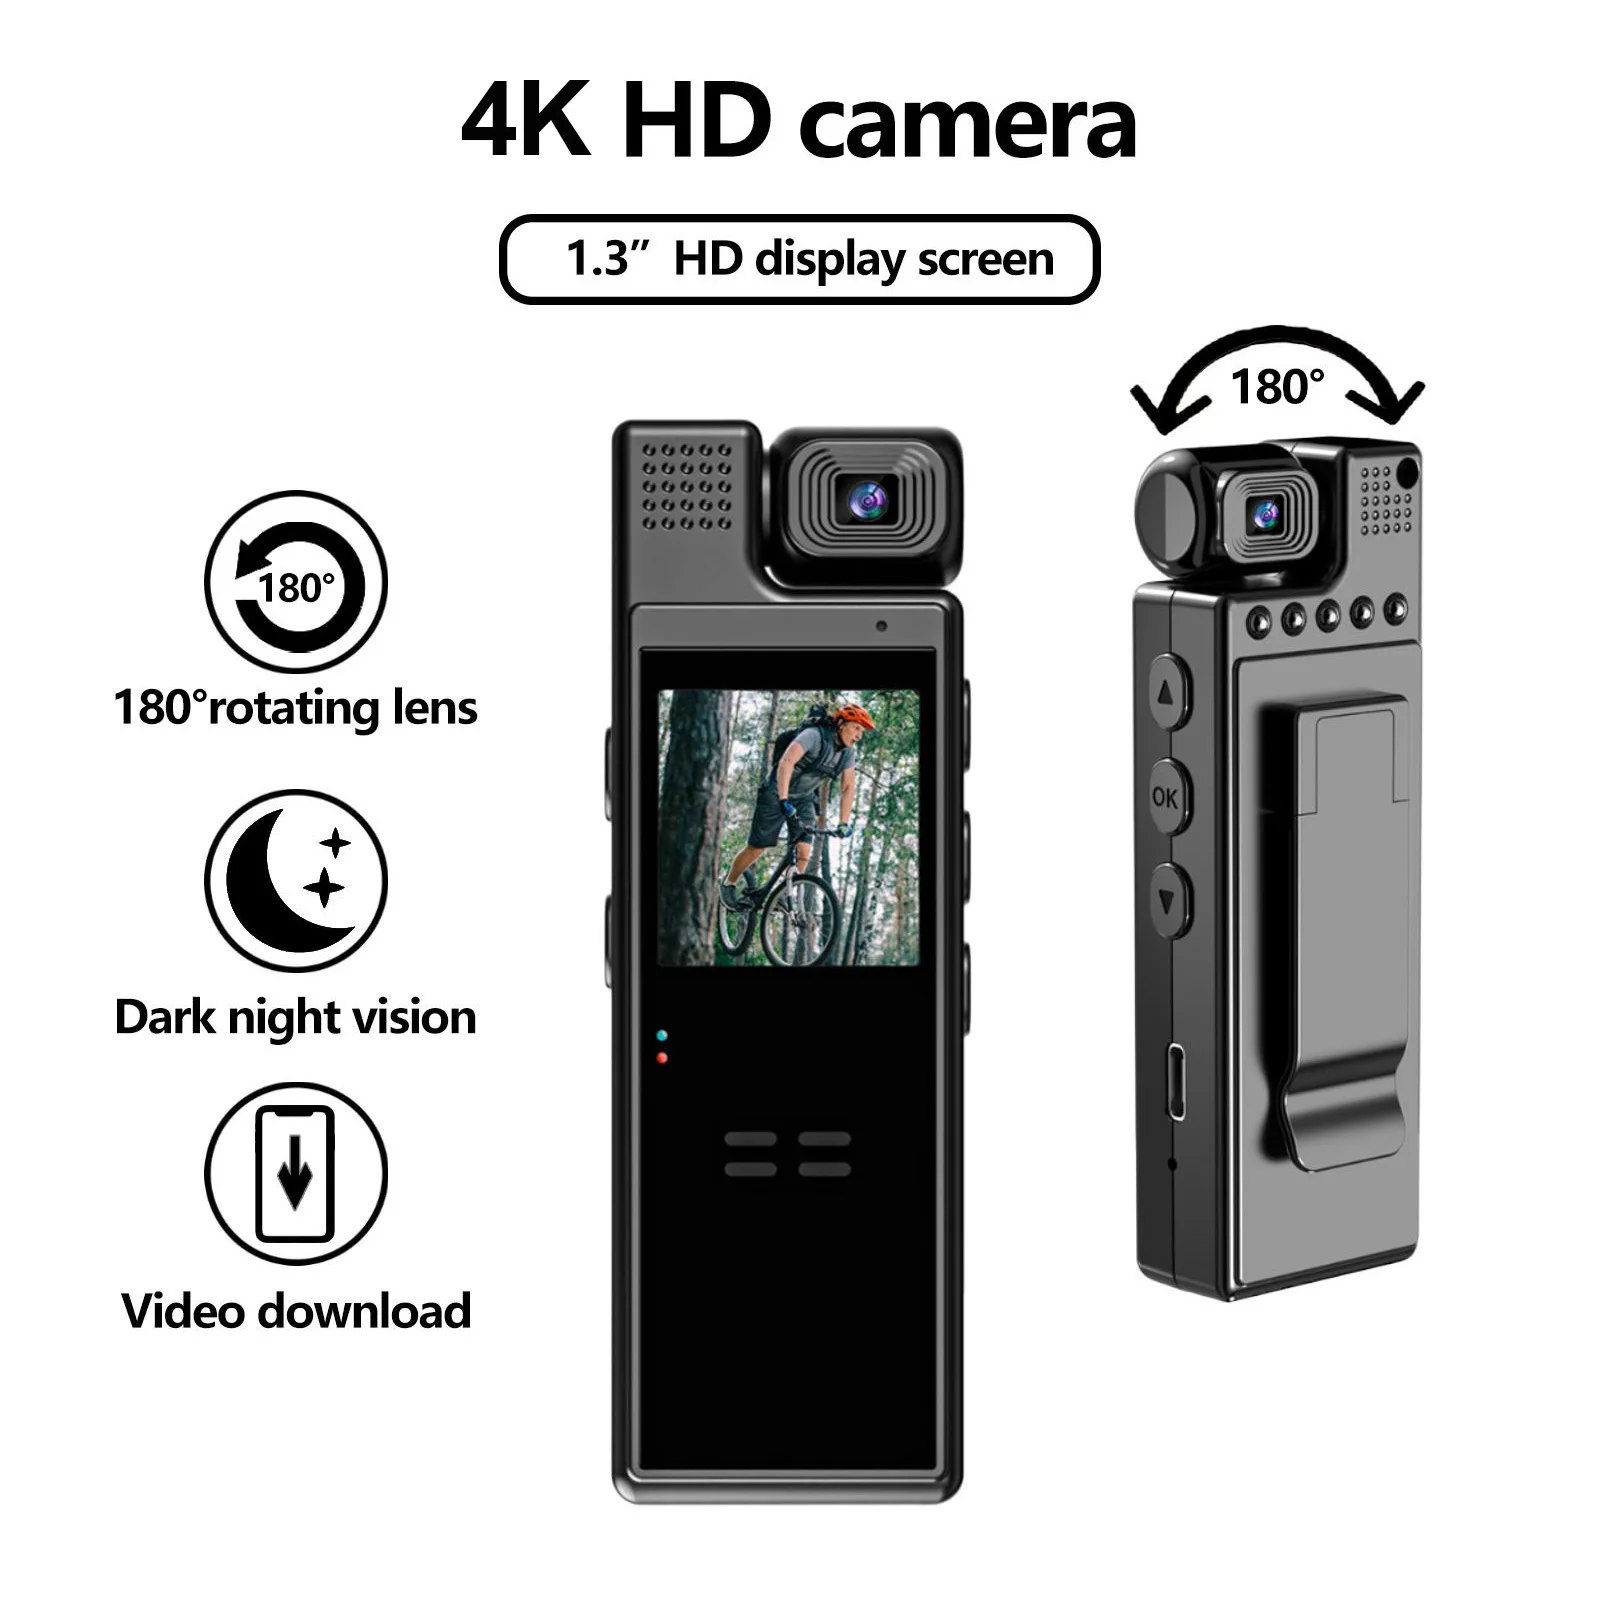 4K UHD Mini Camera with Audio and Video Recording 180°Lens Rotatable WiFi Video Camera Night Vision Support APP Control